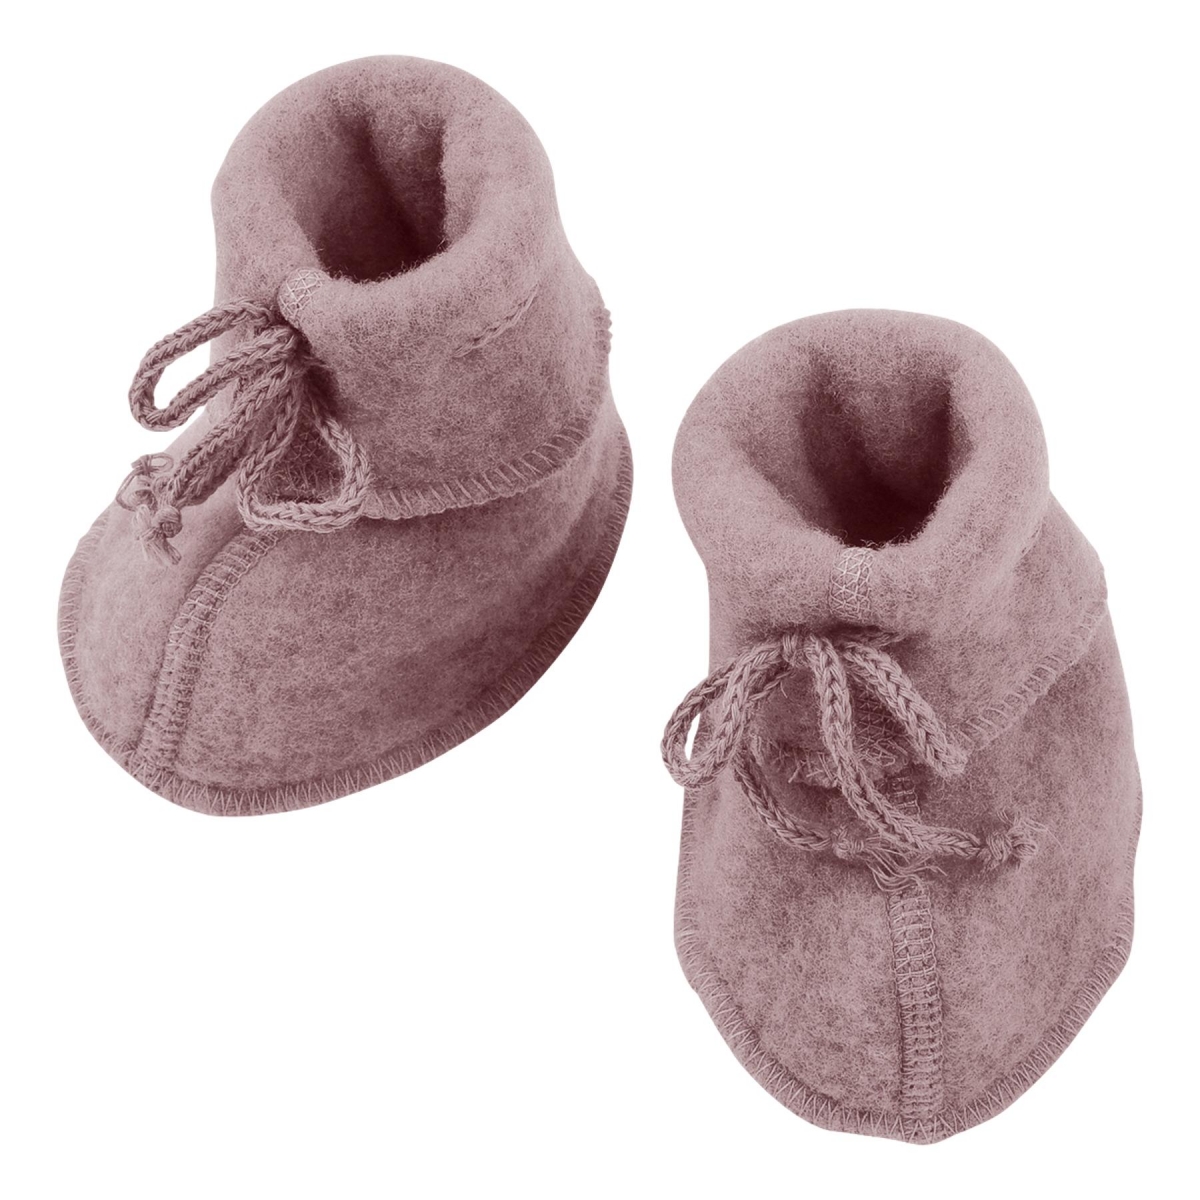 ENGEL Natur Baby-bootees with ribbon Rosewood melange 575582-051E 